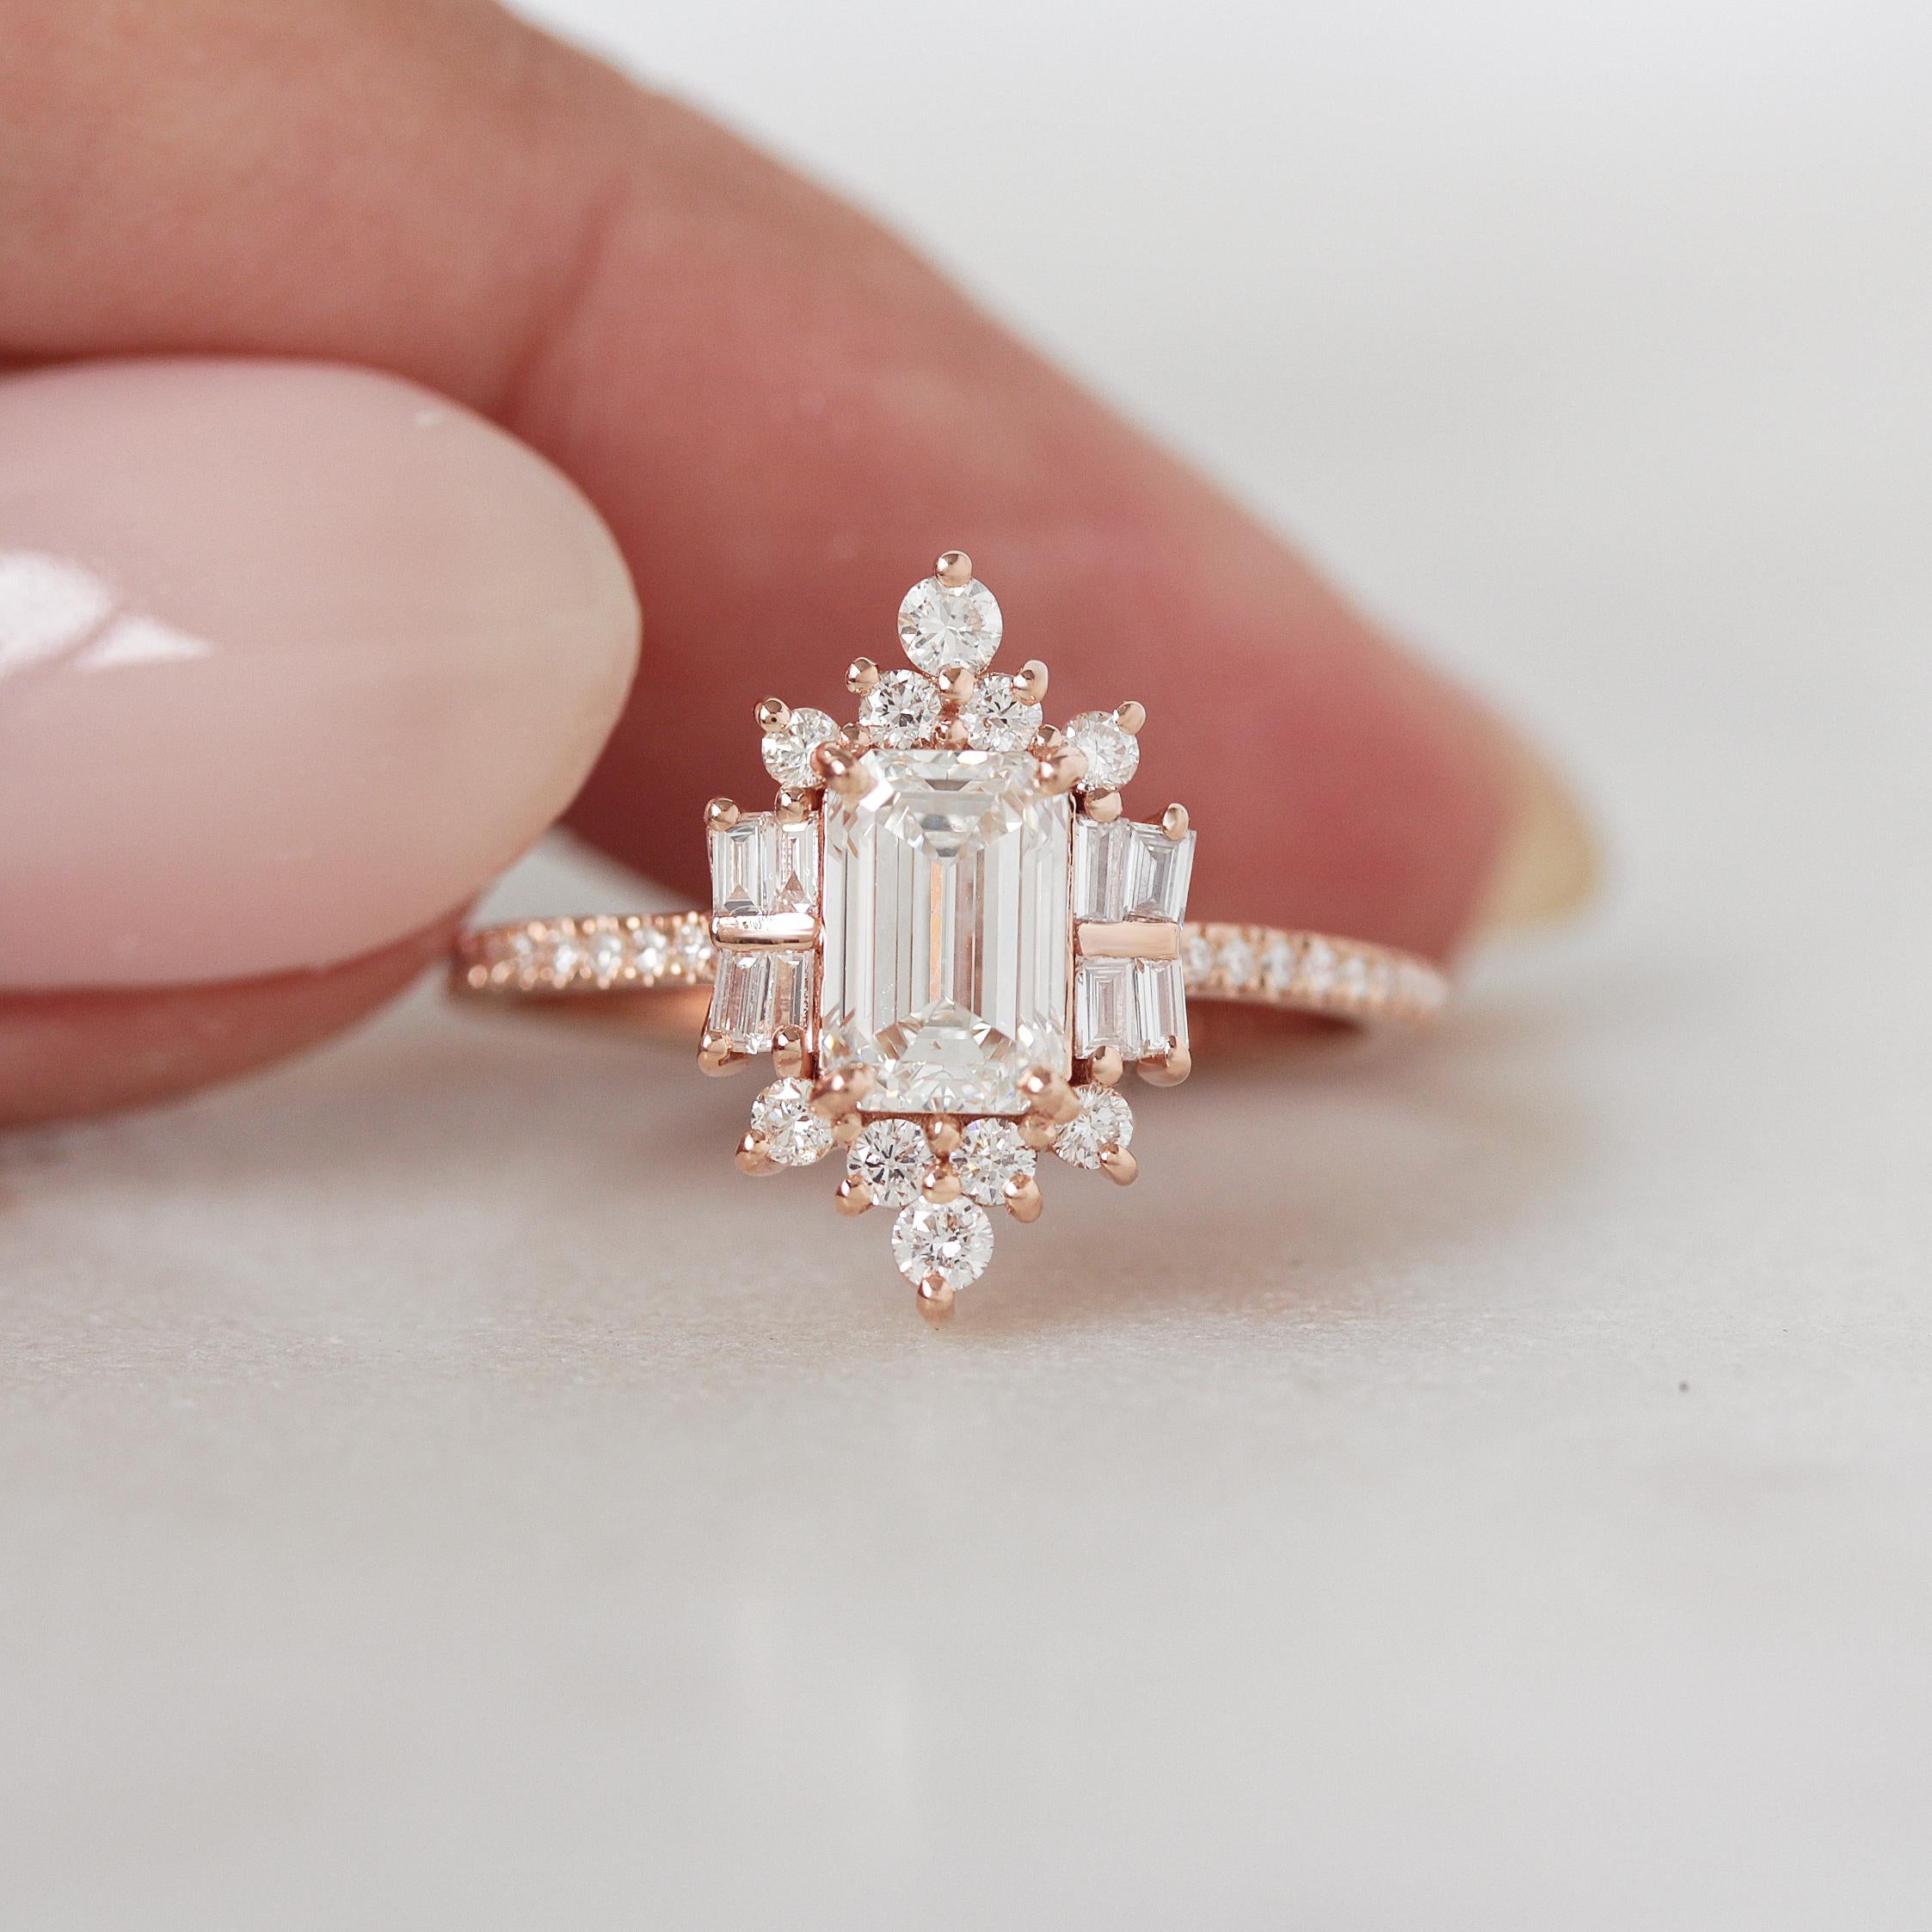 For Sale:  Emerald Cut Diamond Ring Unique Art Deco Engagement Ring The Mirror Palace 3